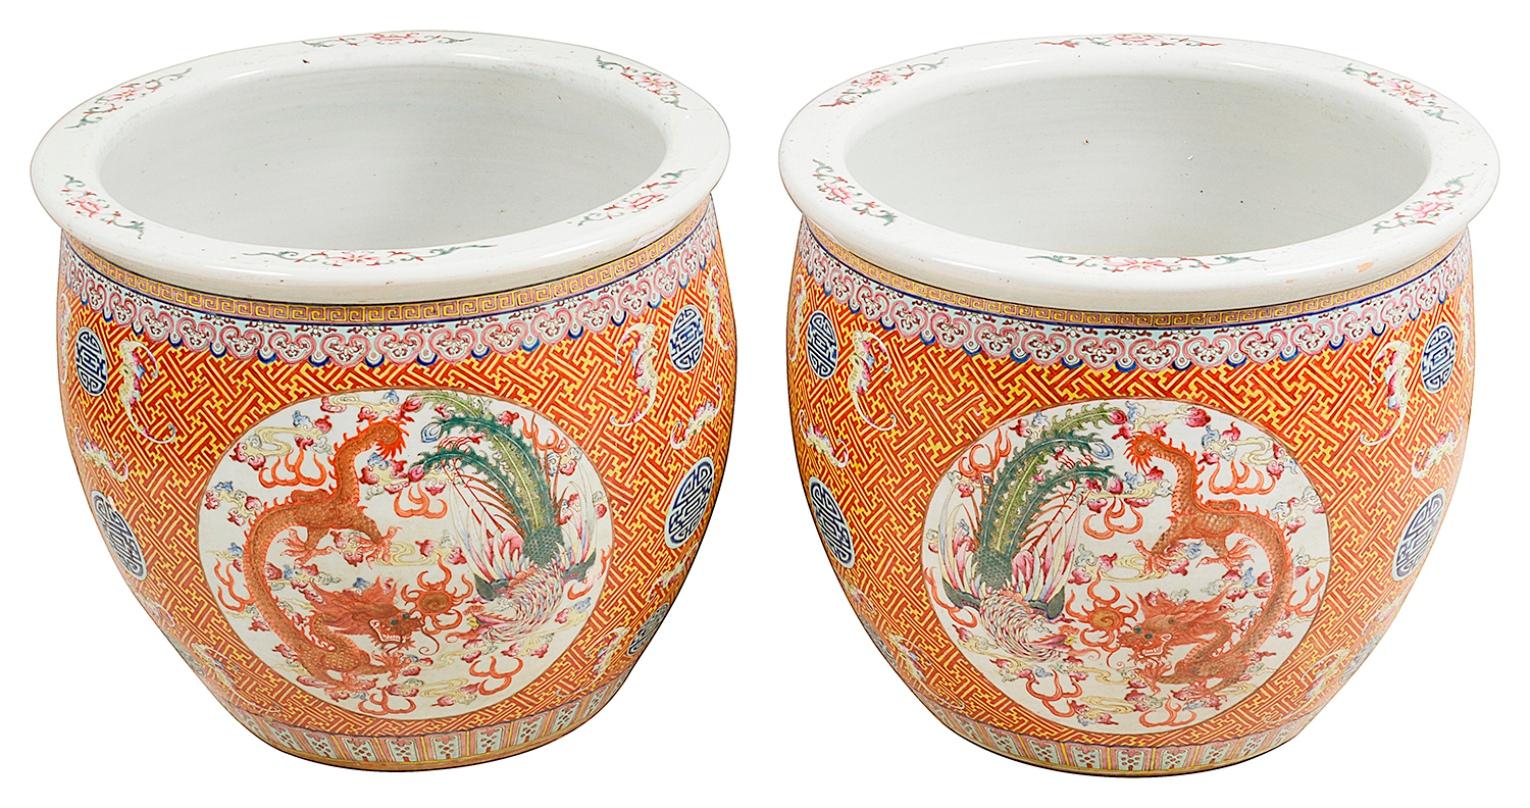 A good quality pair of late 19th century Chinese Famille Rose jardinières, each with orange ground motif decoration, inset hand painted panels depicting mythical dragons and peacocks. Measures: 48cm (19